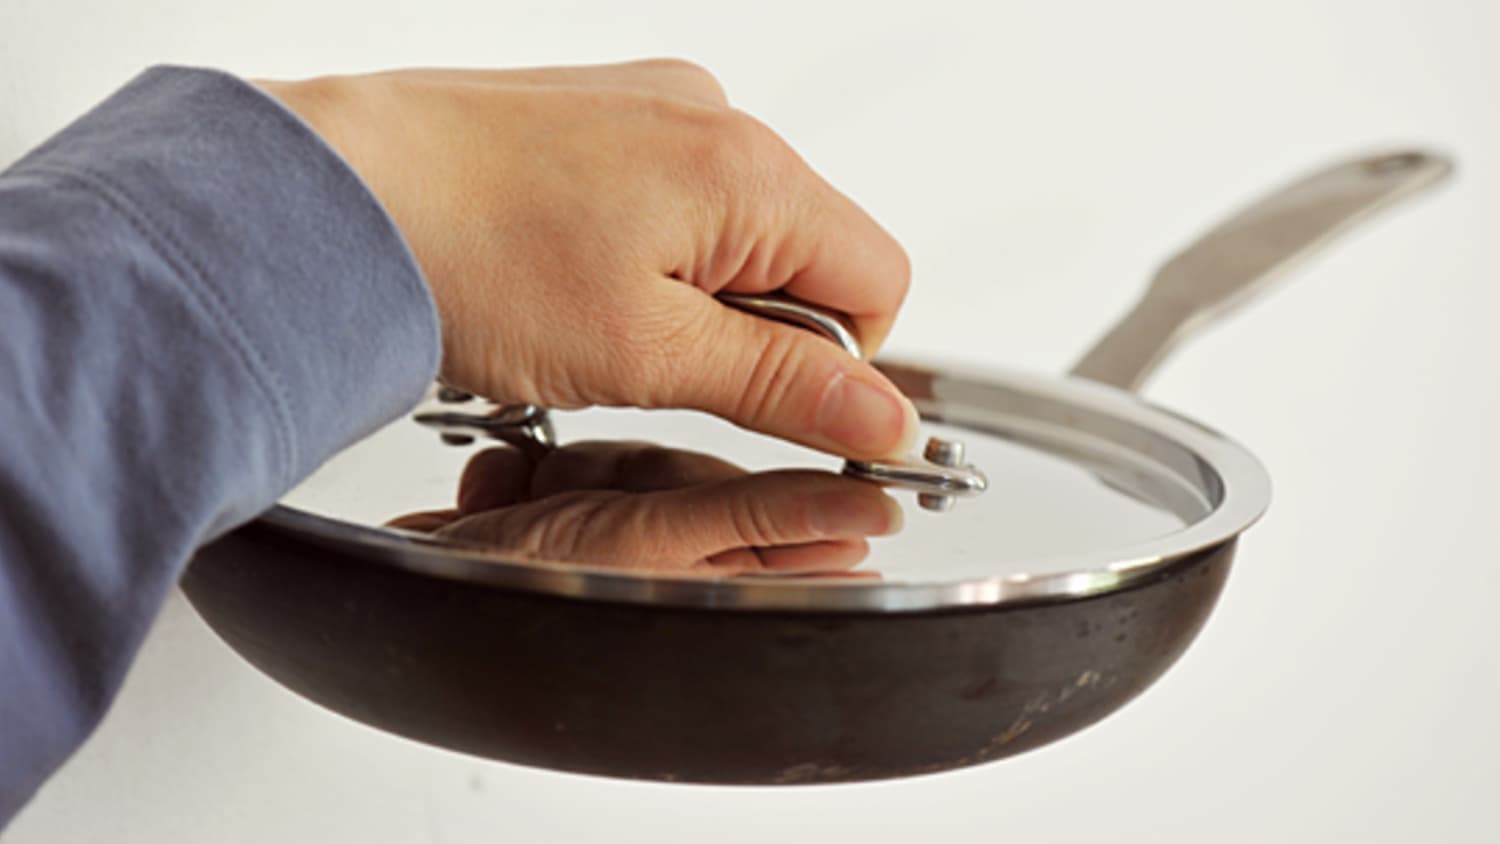 What is the benefit of putting a lid on top of a pan when cooking